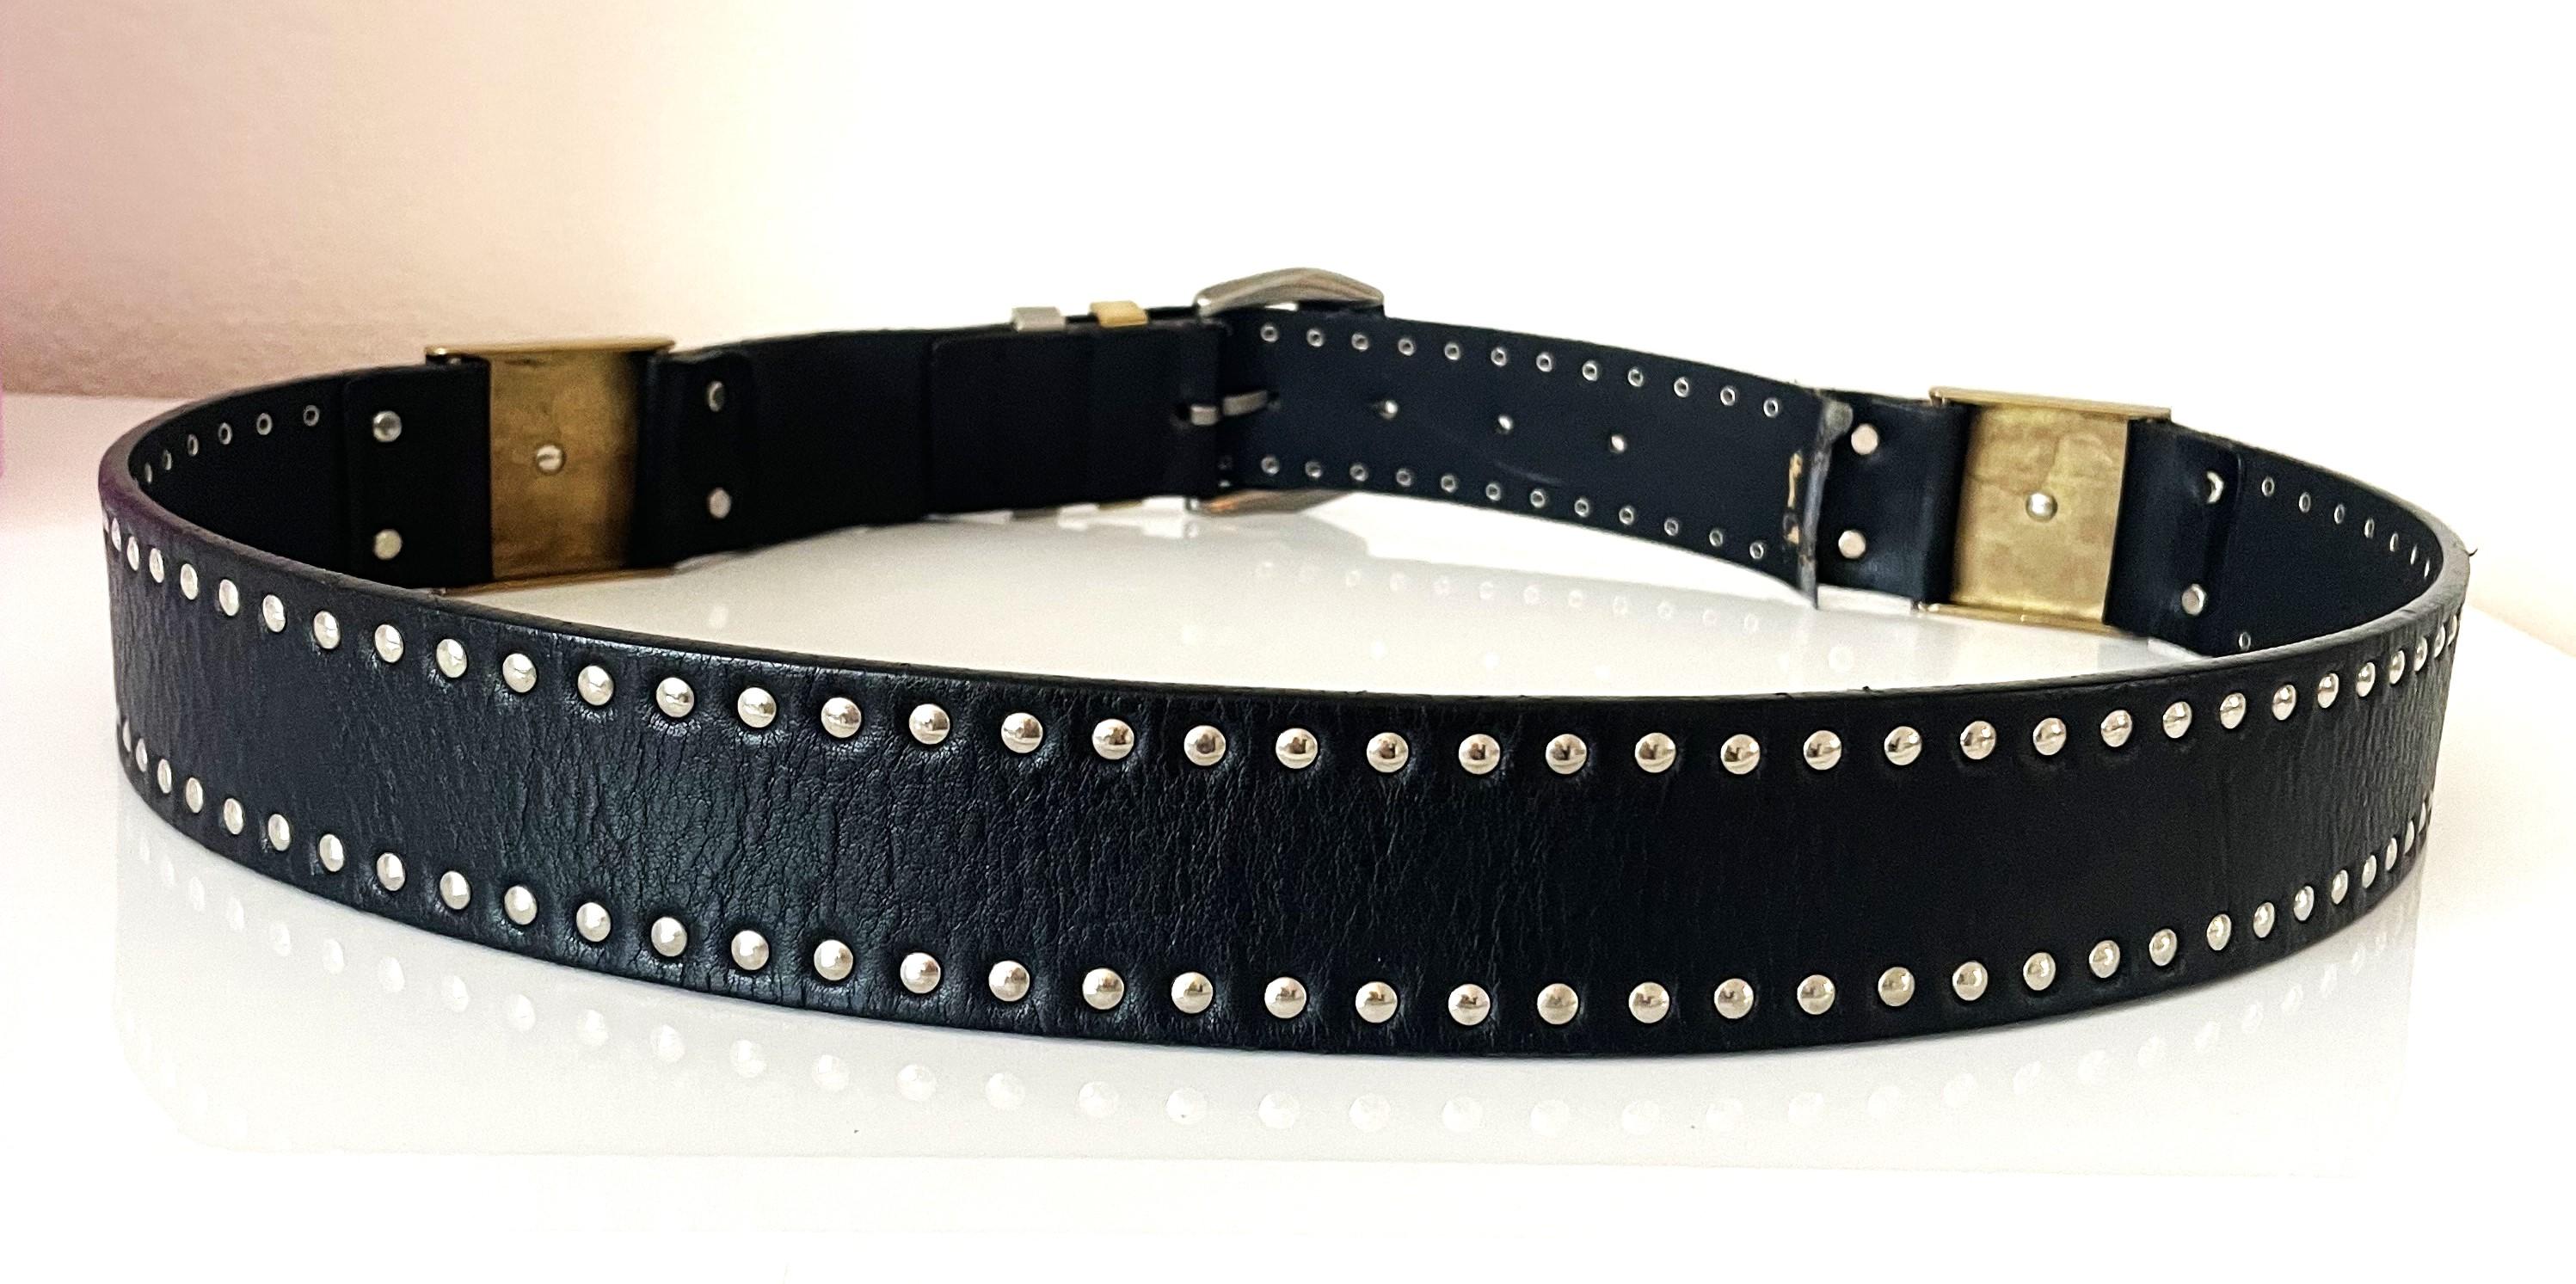 Gianni Versace Belt black studded Medusa head 95/38 from S/S 1992 In Good Condition For Sale In 'S-HERTOGENBOSCH, NL